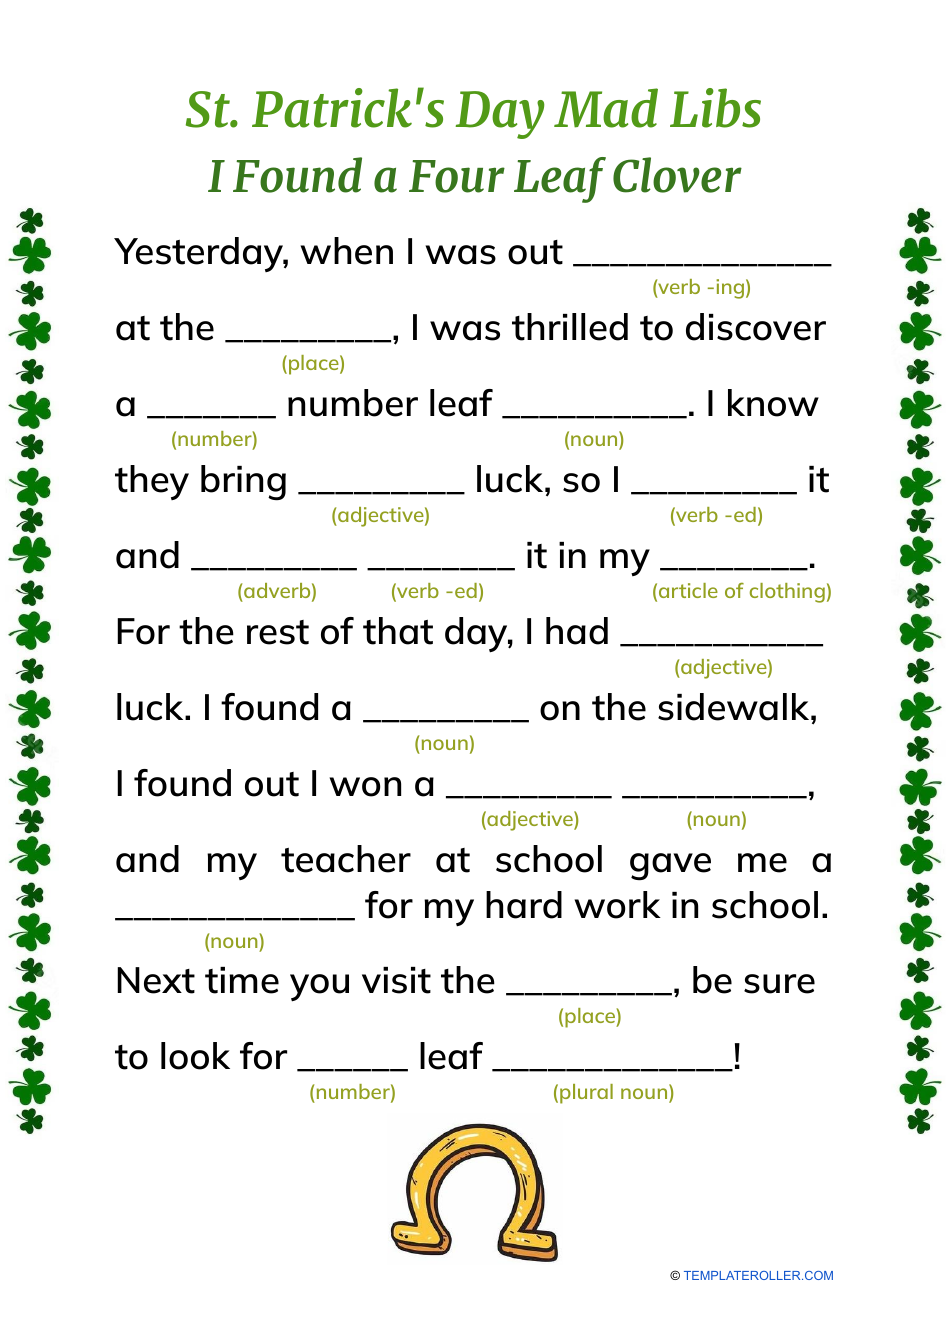 Preview image of the St. Patrick's Day Mad Libs Four Leaf Clover document